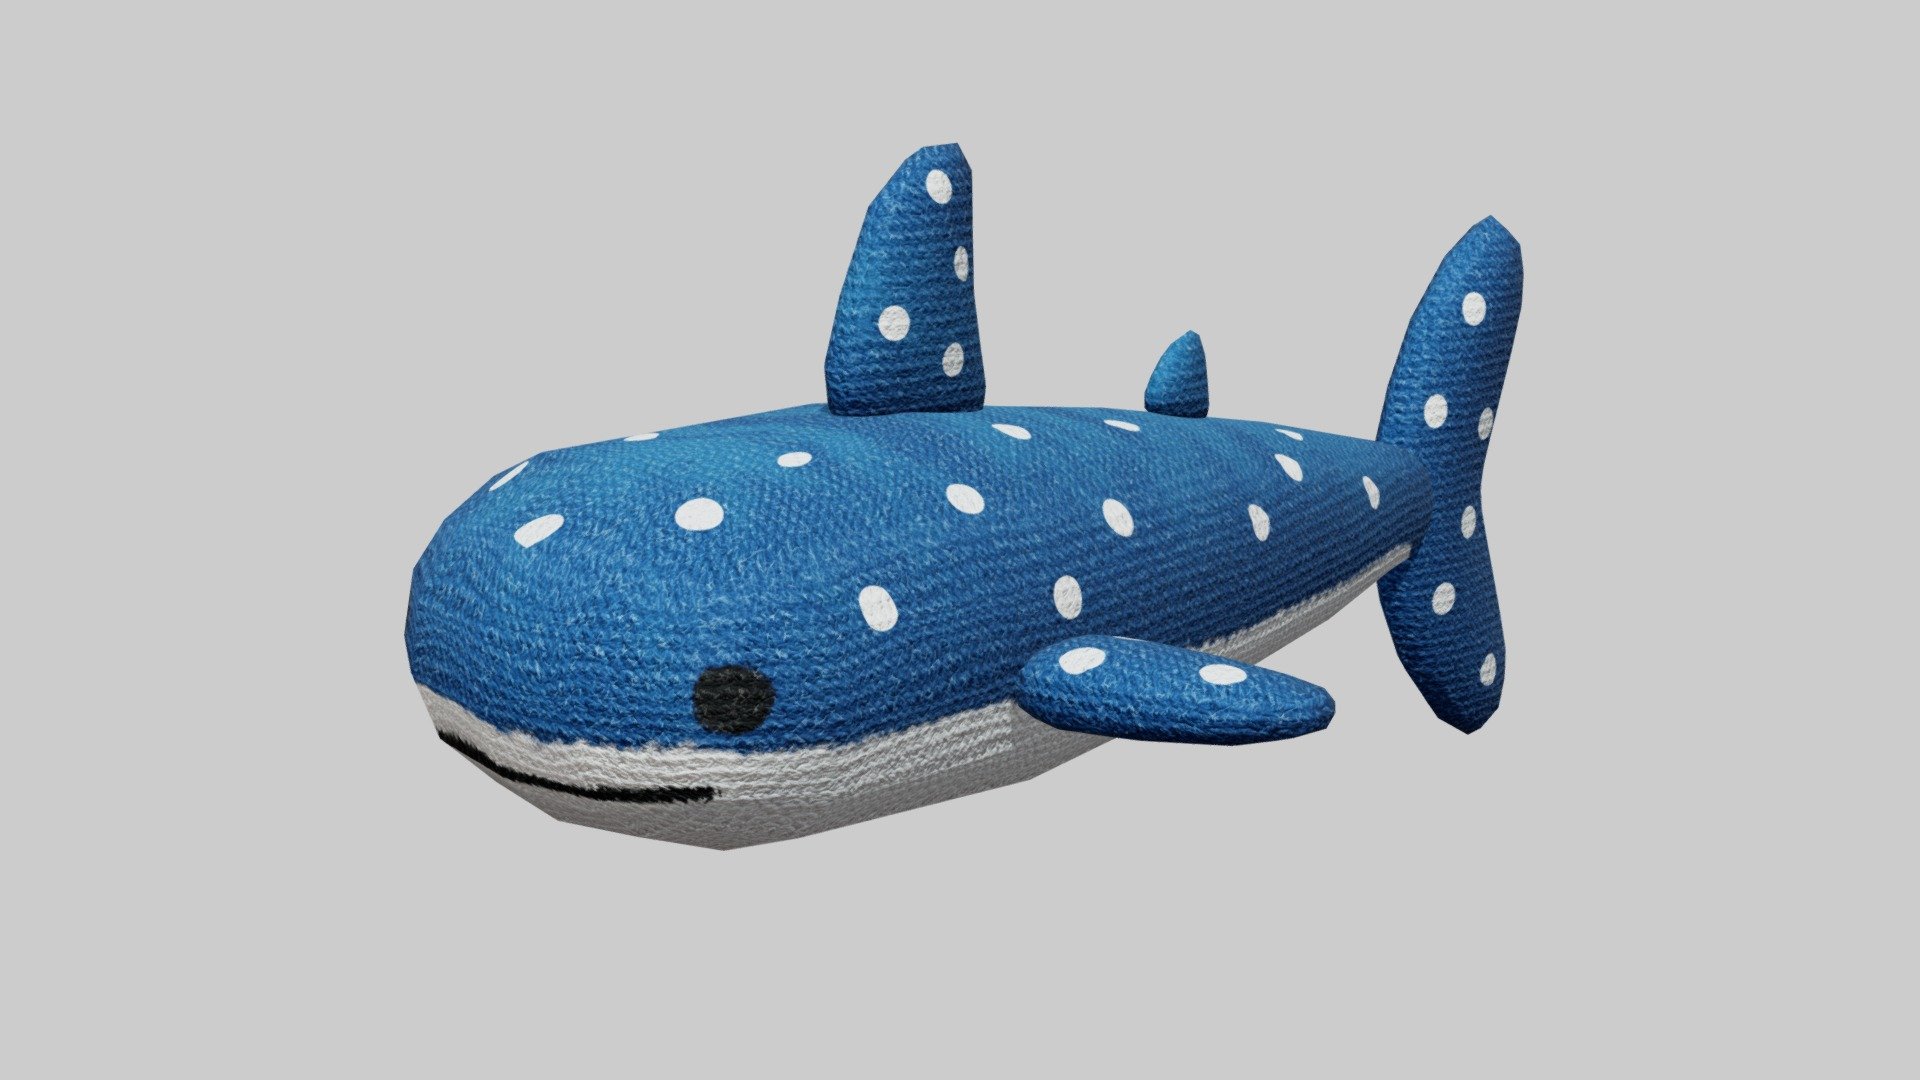 Low Poly Whale Plush Toy for your renders and games

Textures:

Diffuse color, Roughness, Normal

All textures are 4K

Files Formats:

Blend

Fbx

Obj - Whale Plush Toy - Buy Royalty Free 3D model by Vanessa Araújo (@vanessa3d) 3d model